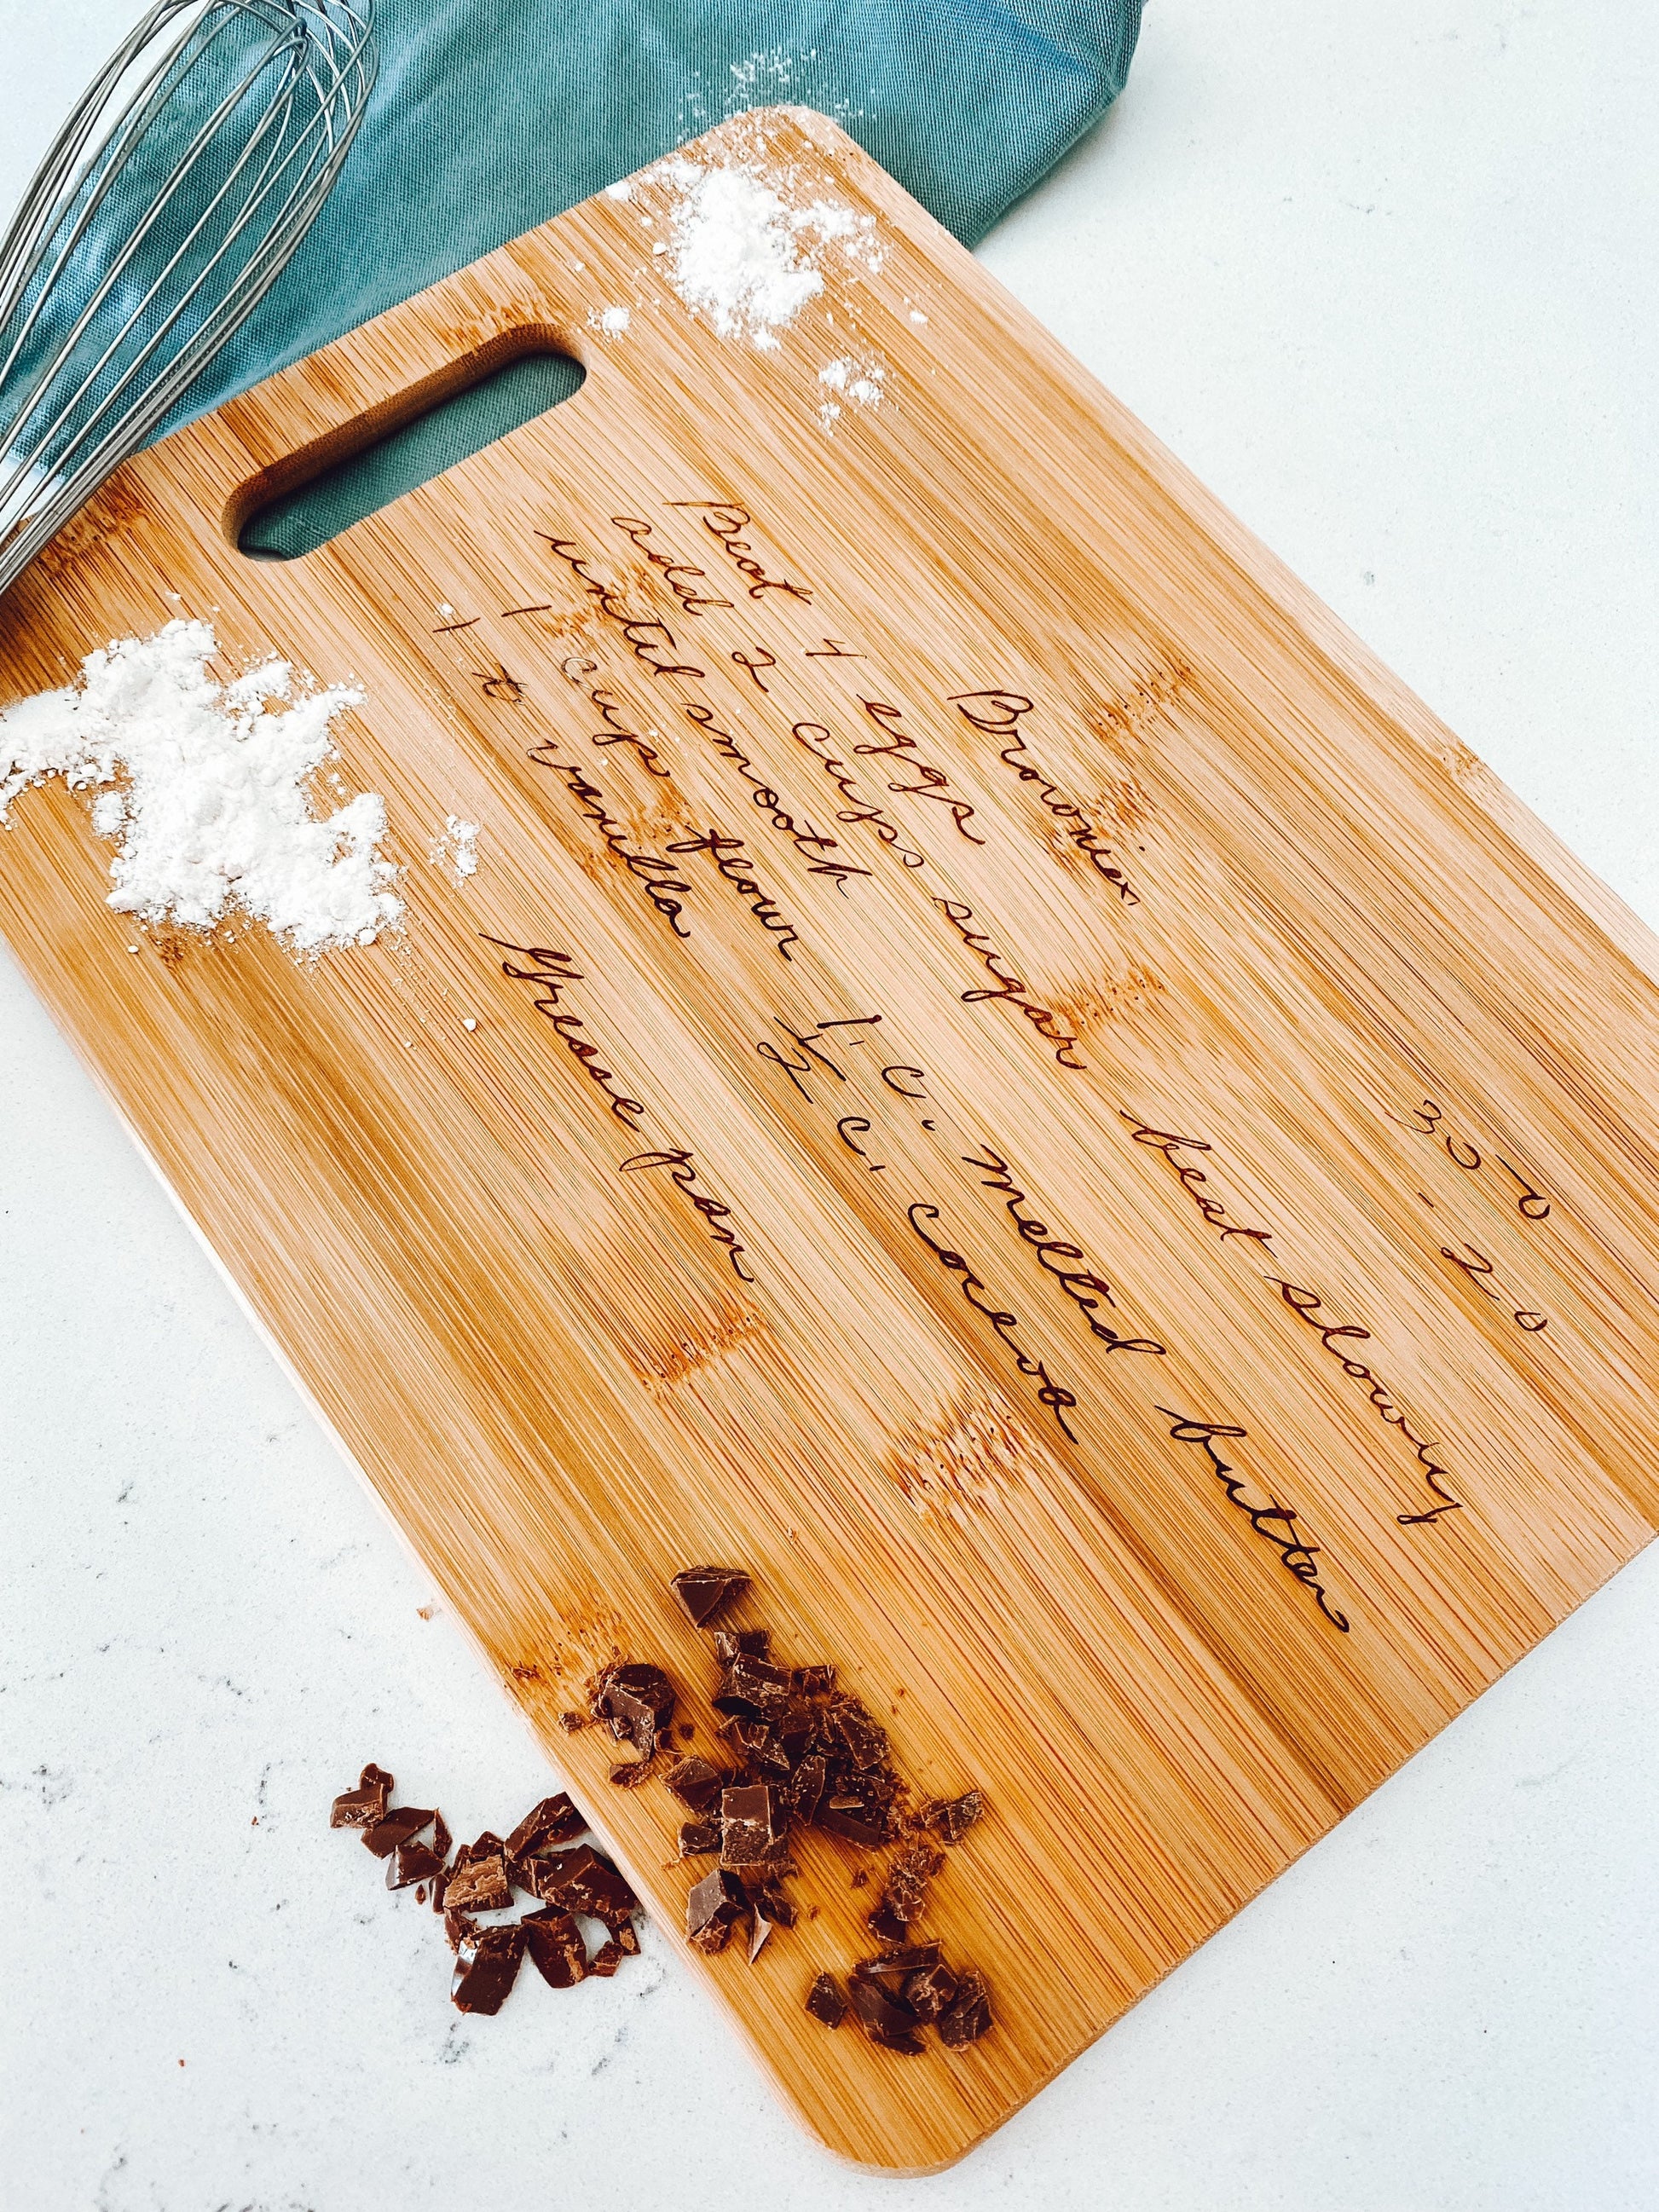 Recipe Cutting Board Engraved, Customized Cutting Board Recipe, Handwritten Recipe Cutting Board Handwriting Gift, Christmas Gift for Her